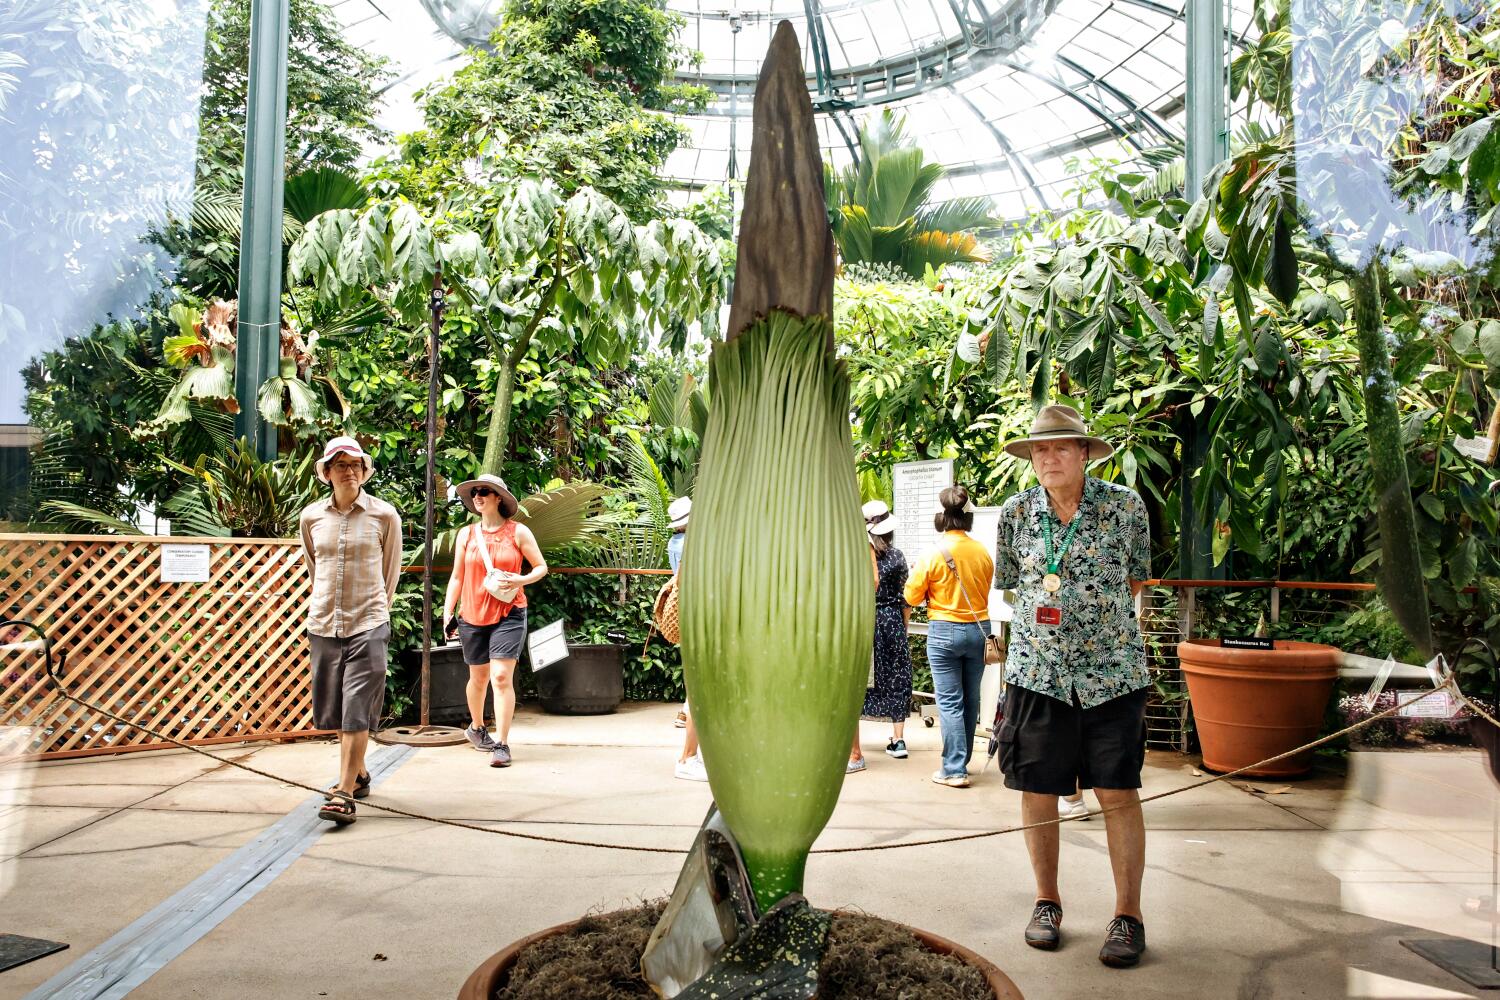 Another rare corpse flower set to stink up the Huntington with the smell of dead rats 